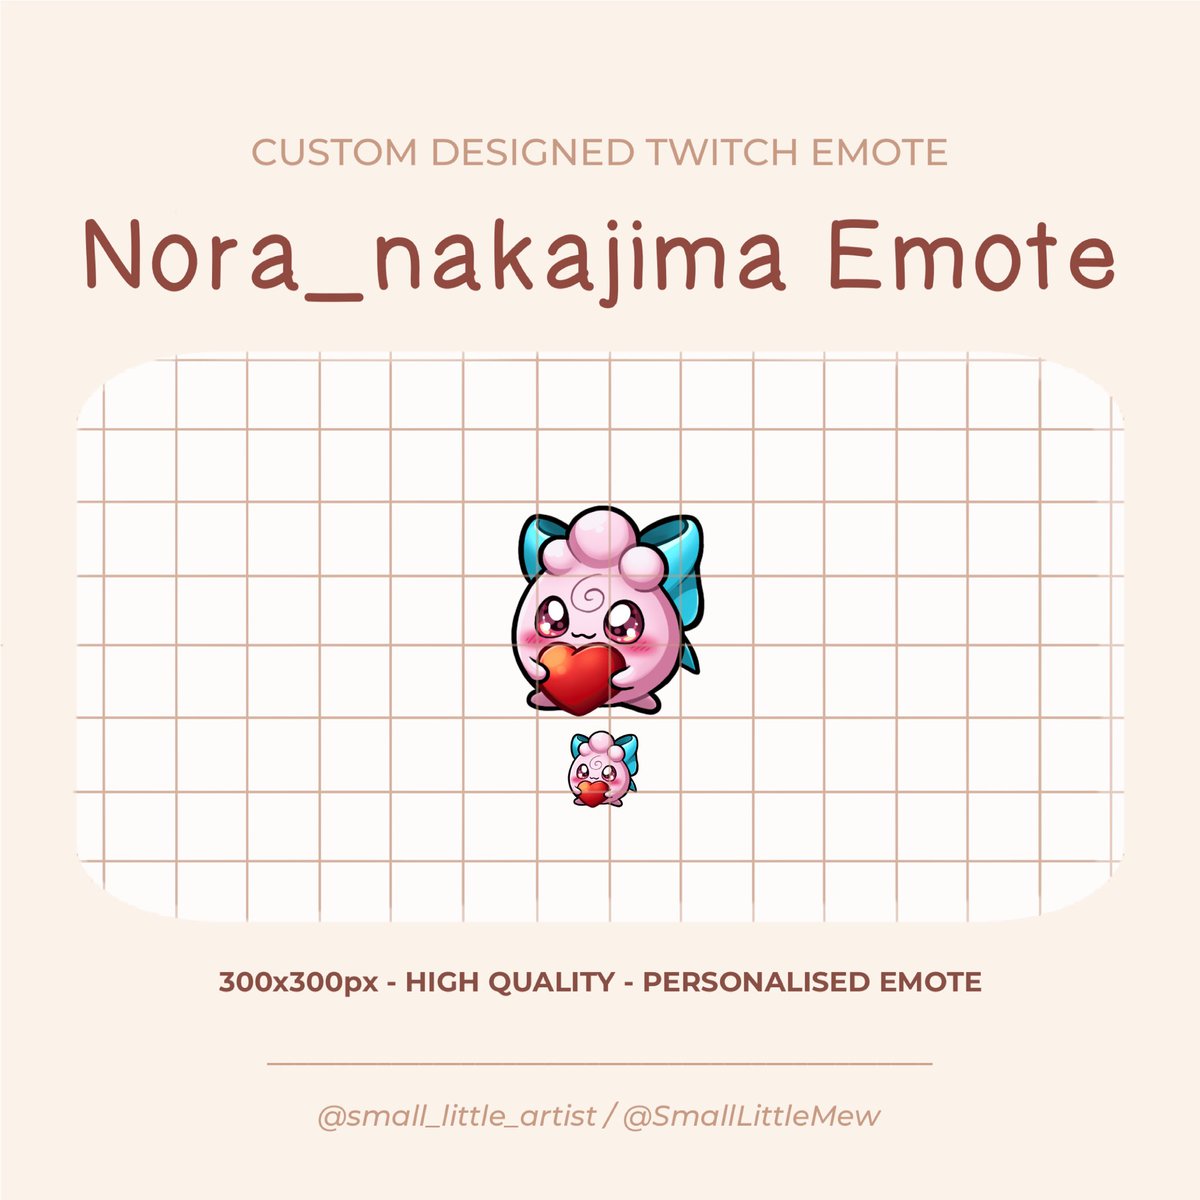 Emote commission I did for @nora_nakajima this weekend! 🥰 I loved her idea of giving Igglybuff a light blue bow! Too cute! 🥺💕

#emotecommission #emote #commission #twitchemote #emoteartist #customemote #chibiemote #chibi #anime